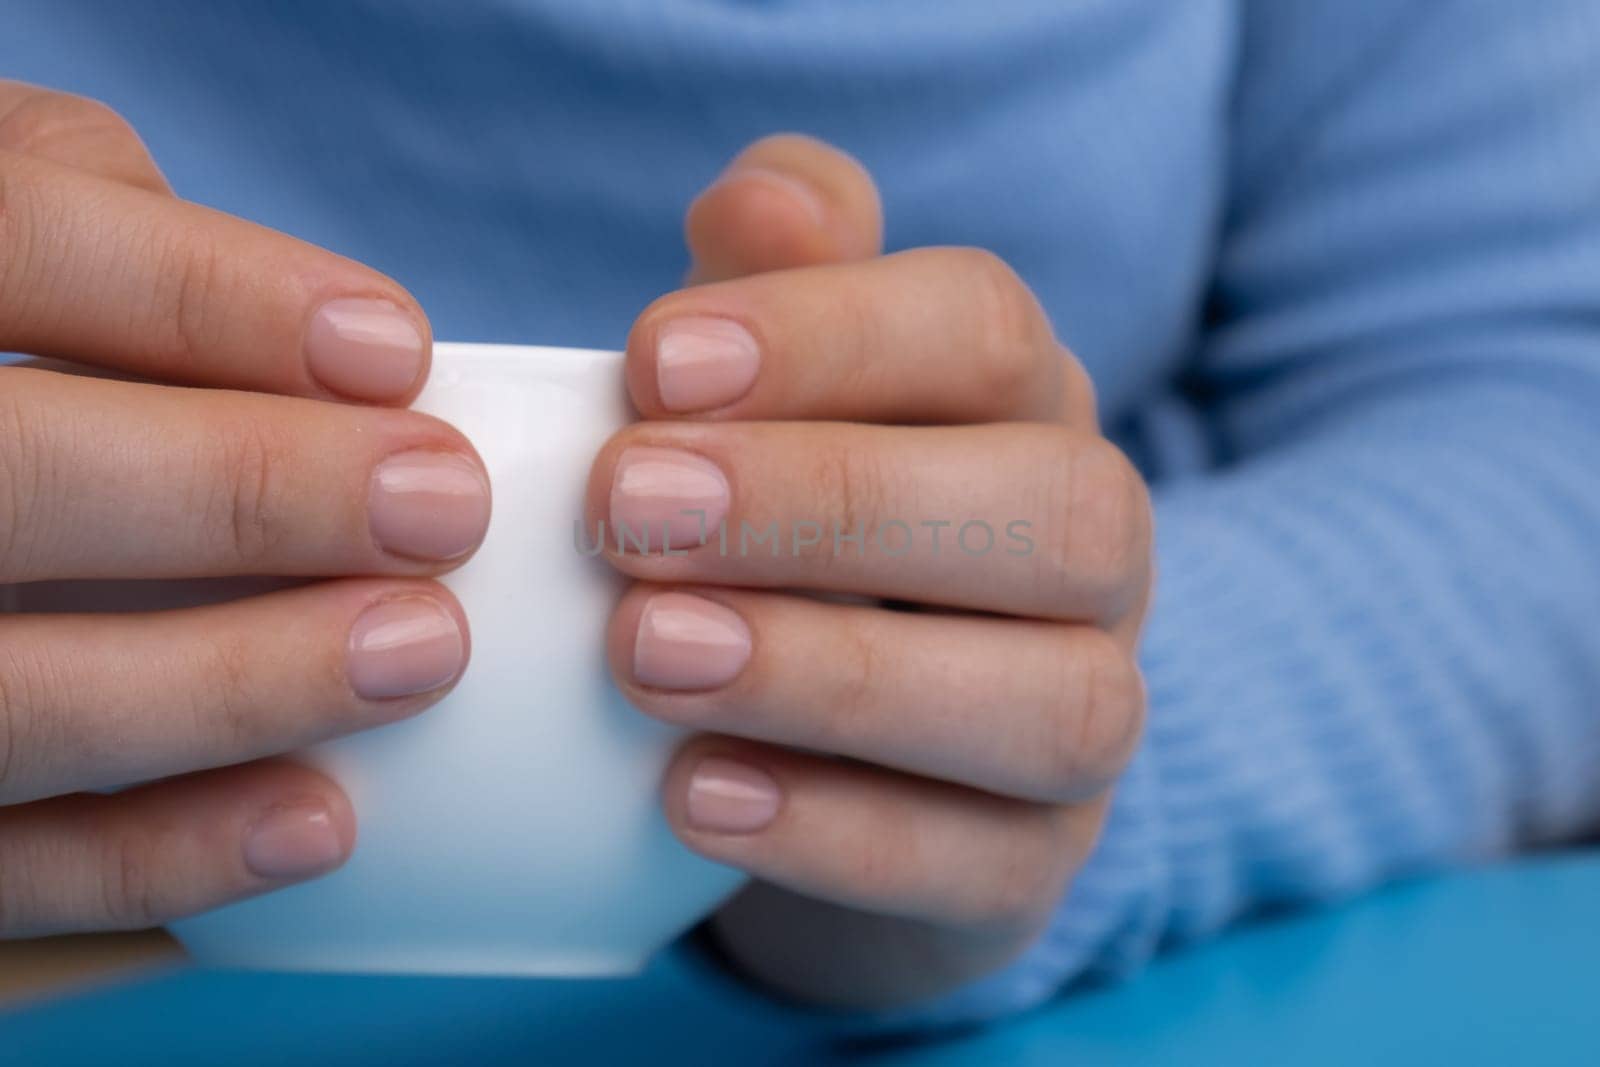 Pastel softness manicured nails on white cup on blue background. Woman showing her new manicure in colors of pastel palette. Simplicity decor fresh spring vibes earth-colored neutral tones design